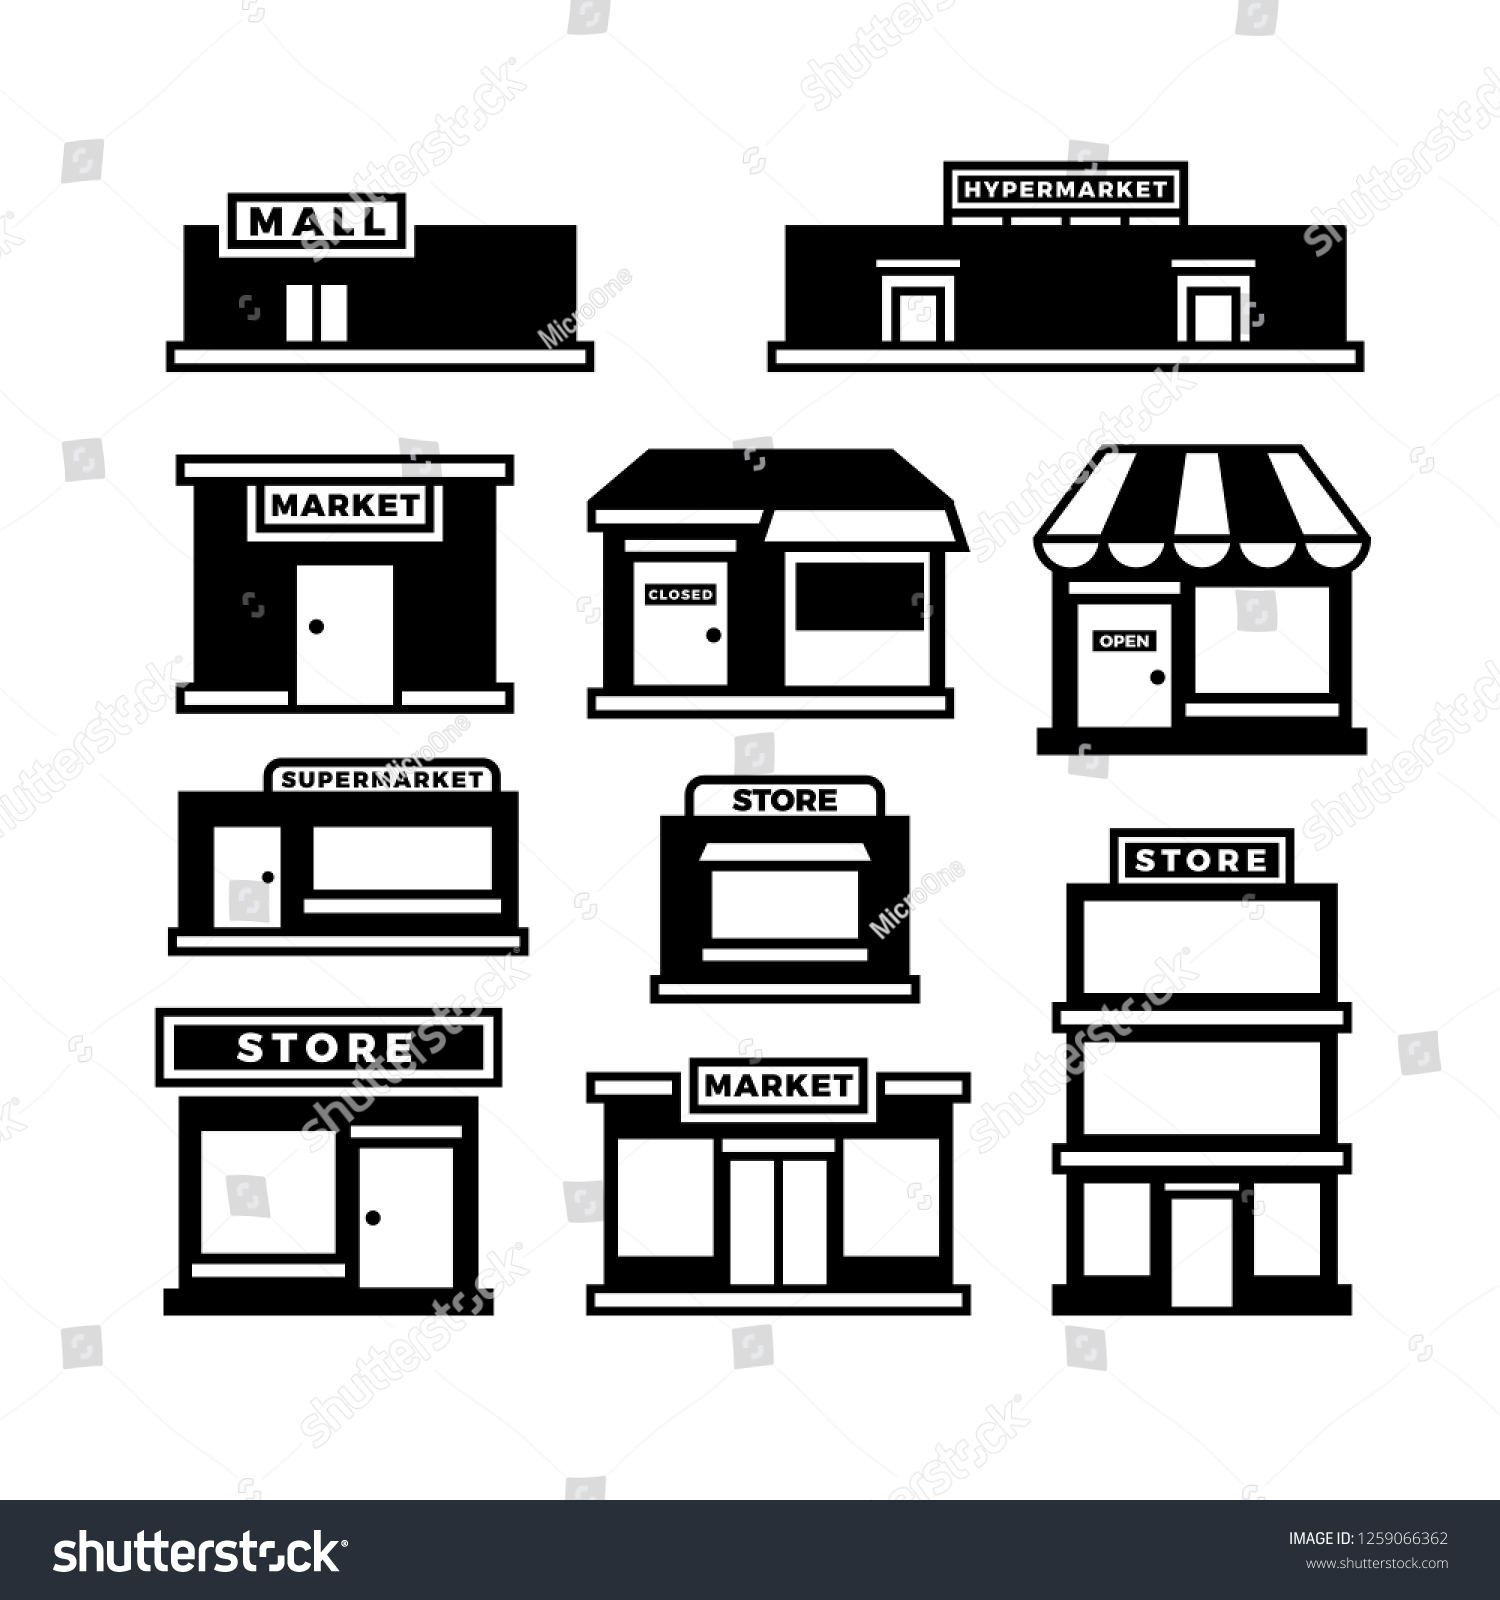 Mall and shop building icons. Shopping and retail pictograms. Supermarket, store exterior black symbols isolated #1259066362